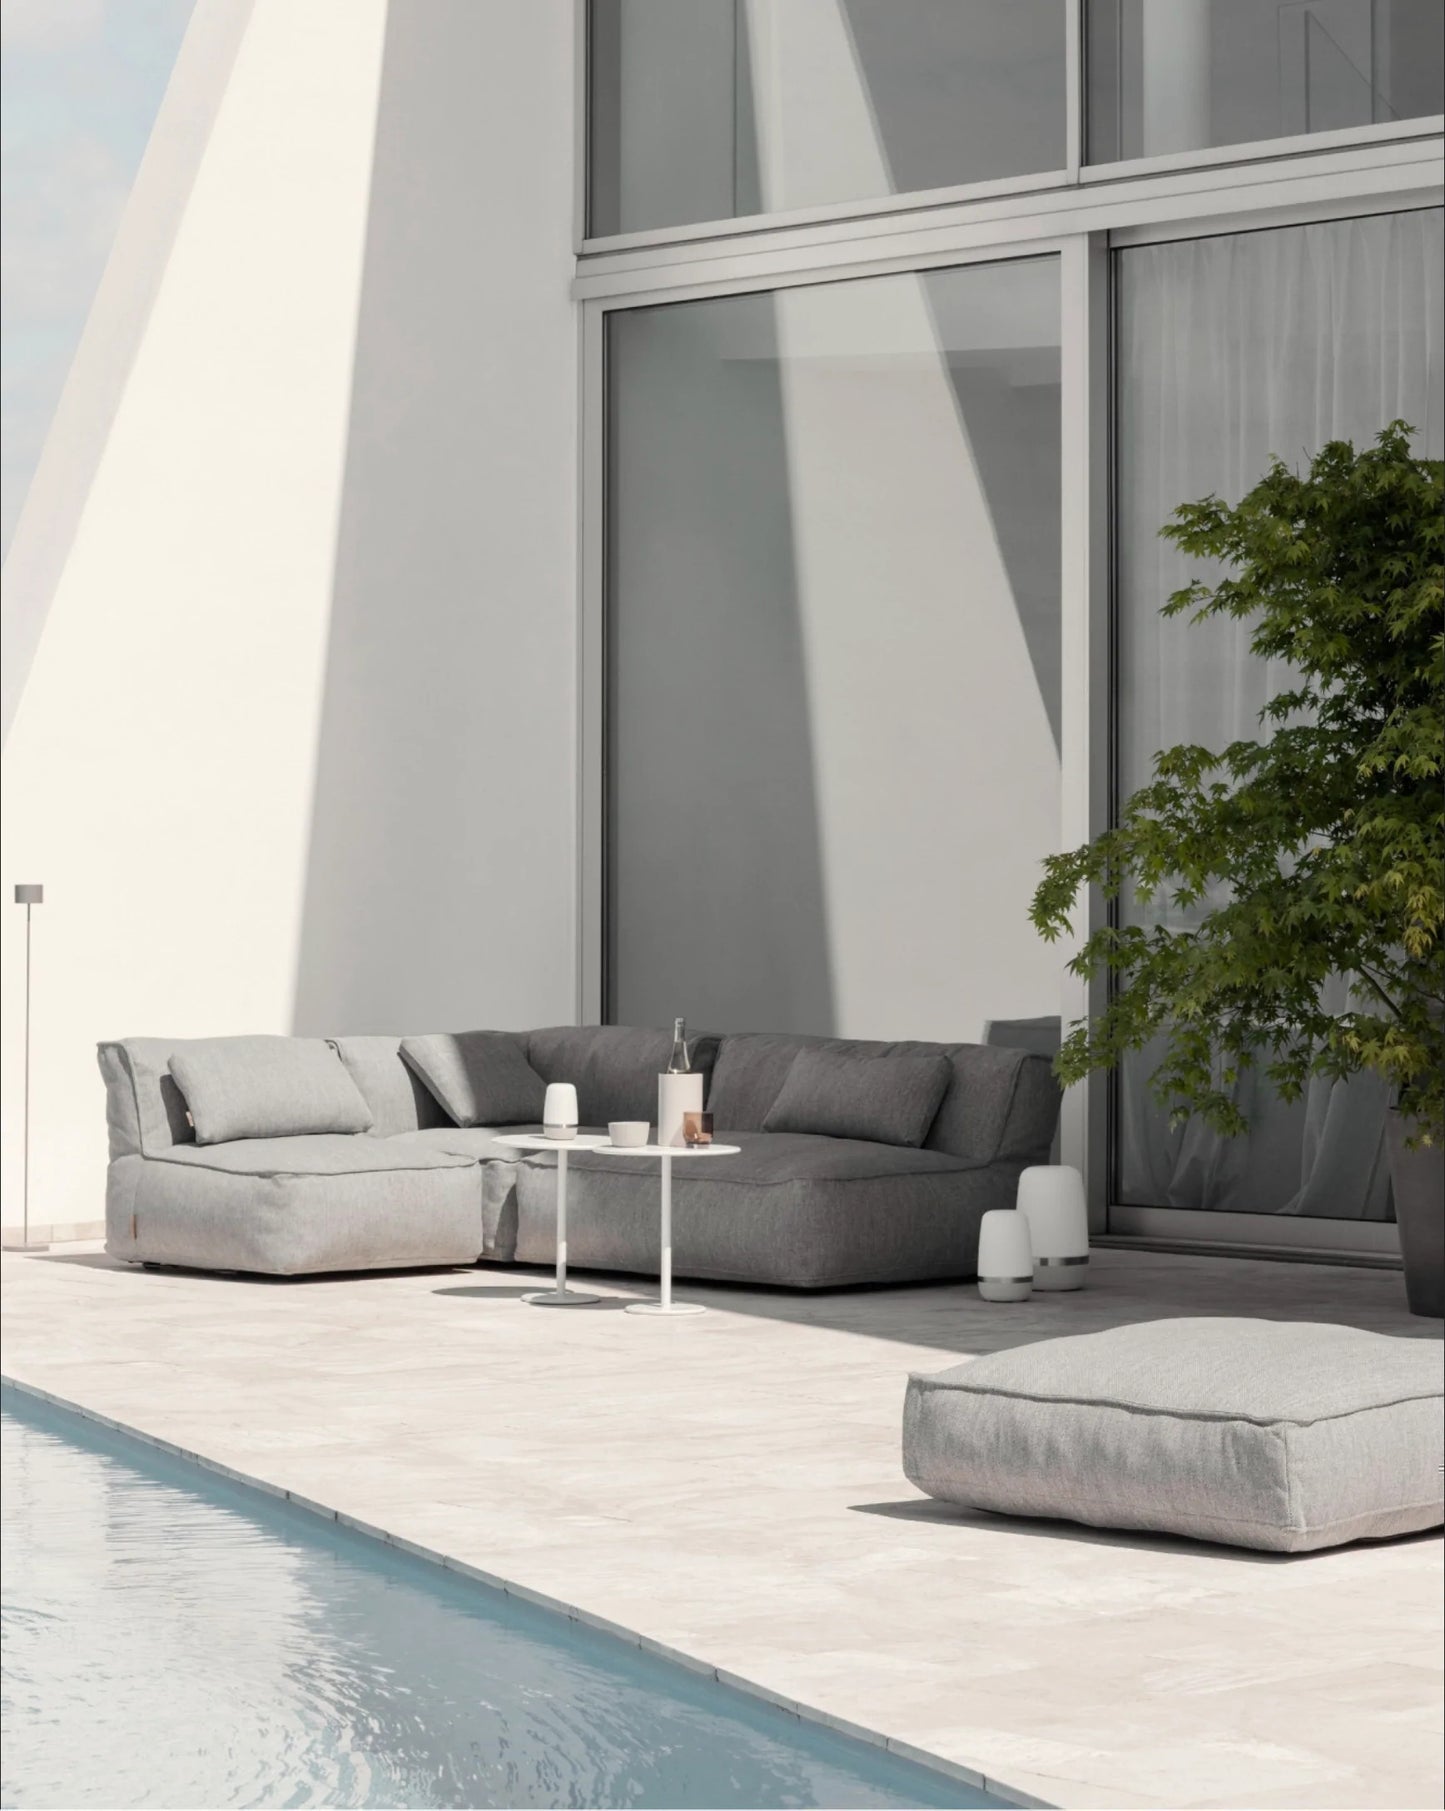 Blomus Grow Double Chaise Sectional Outdoor Patio Lounger Coal 62075